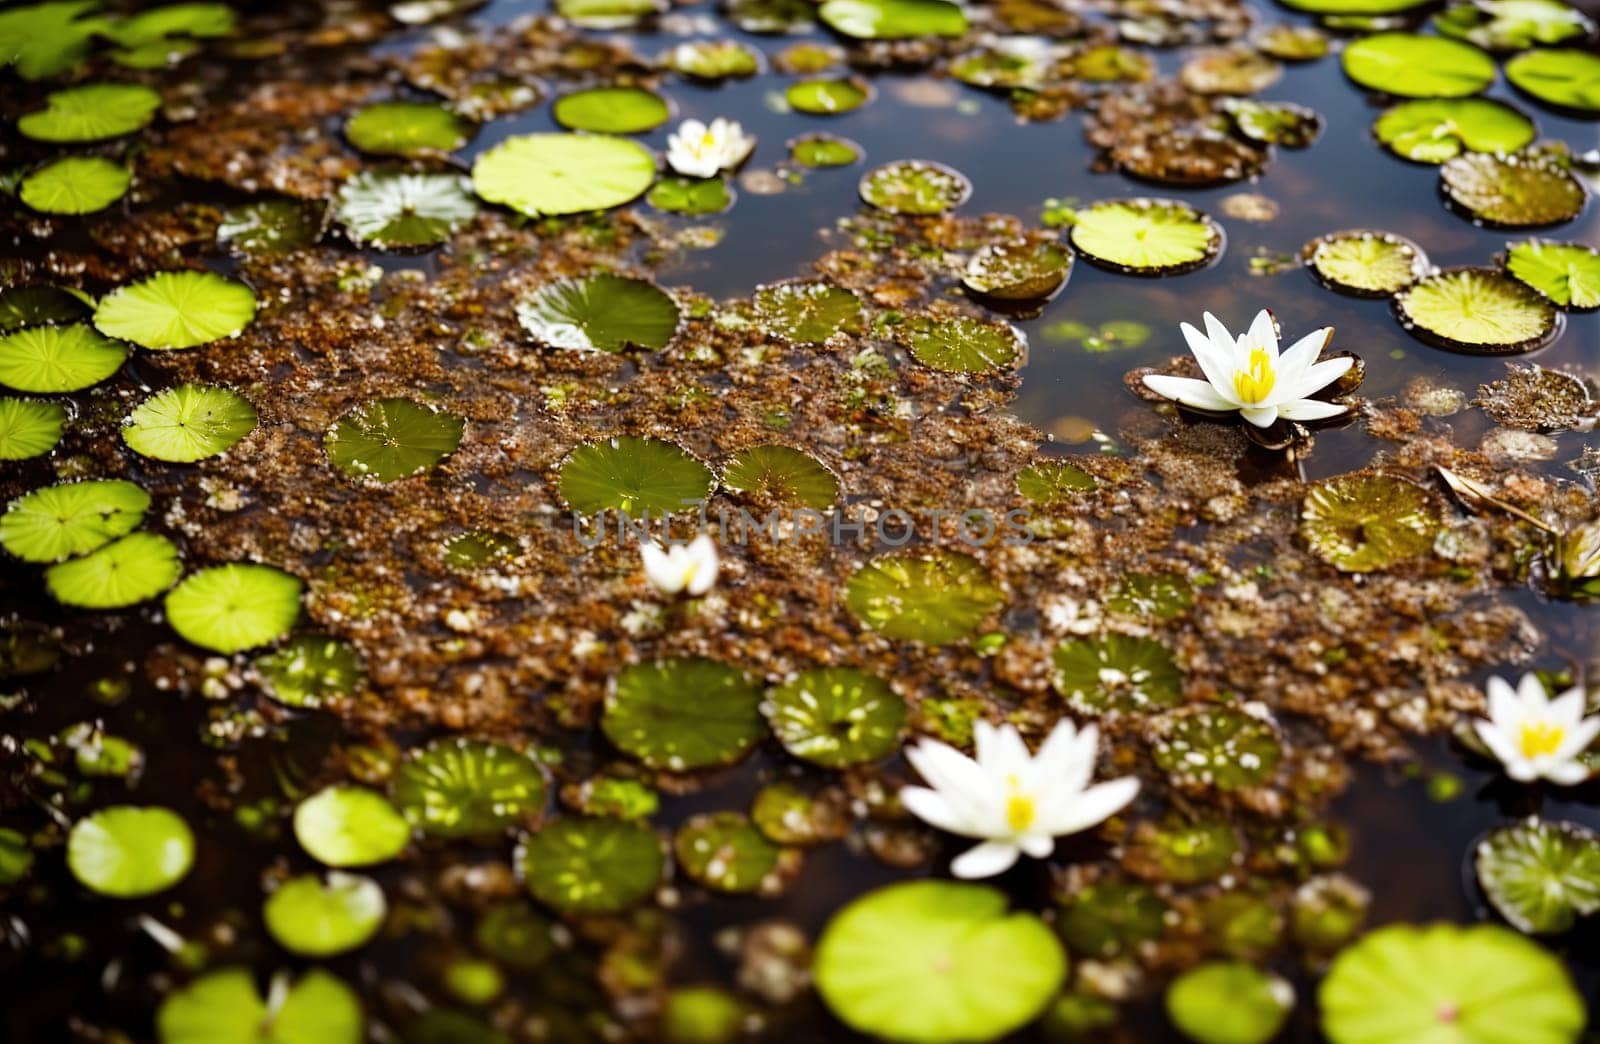 Lilies in the water swamp, water lilies green color by macroarting